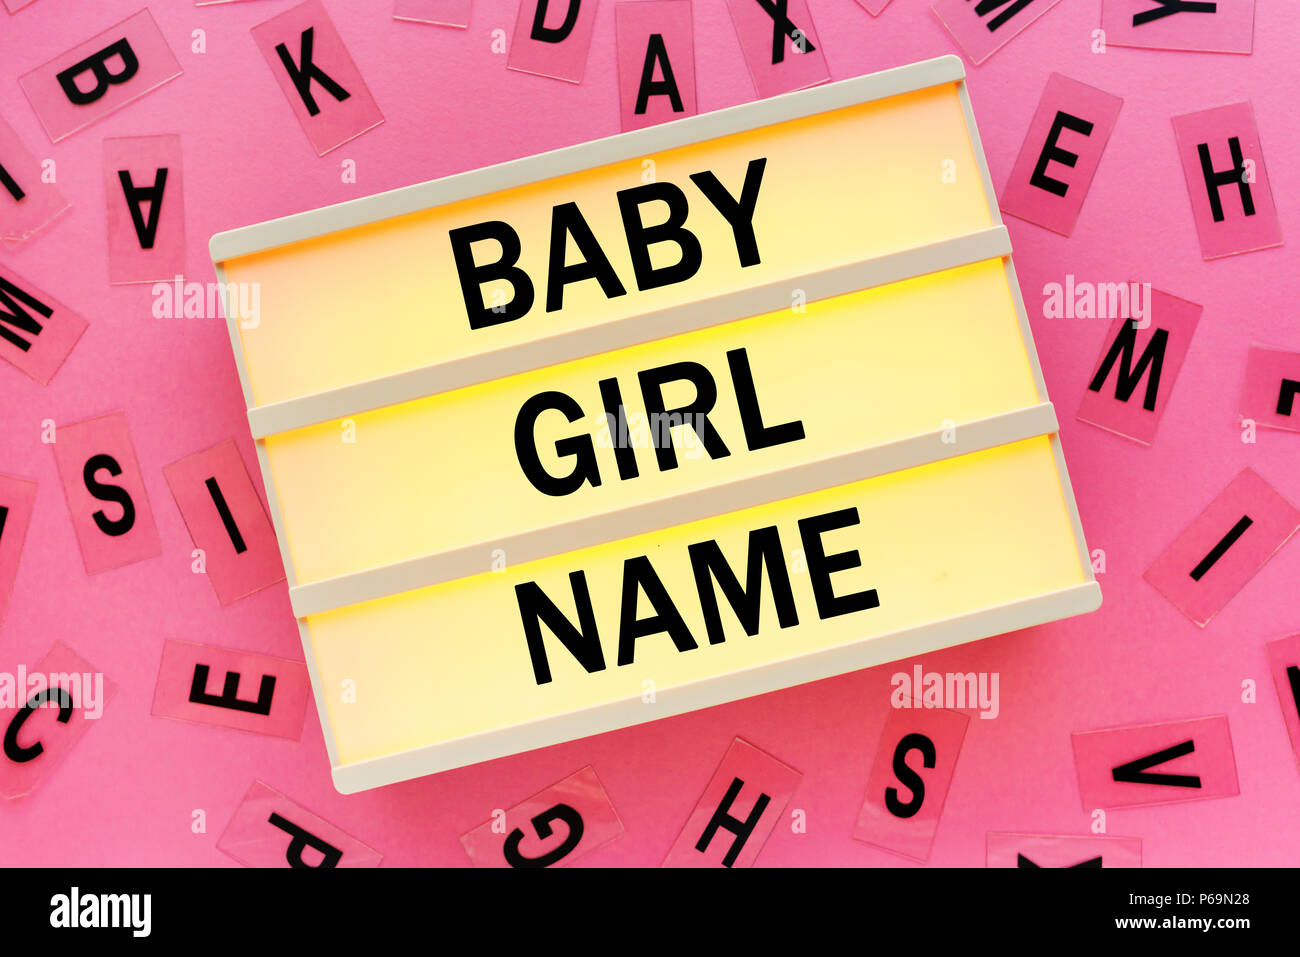 Choosing baby girl name concept with lightbox and various letters scattered around Stock Photo